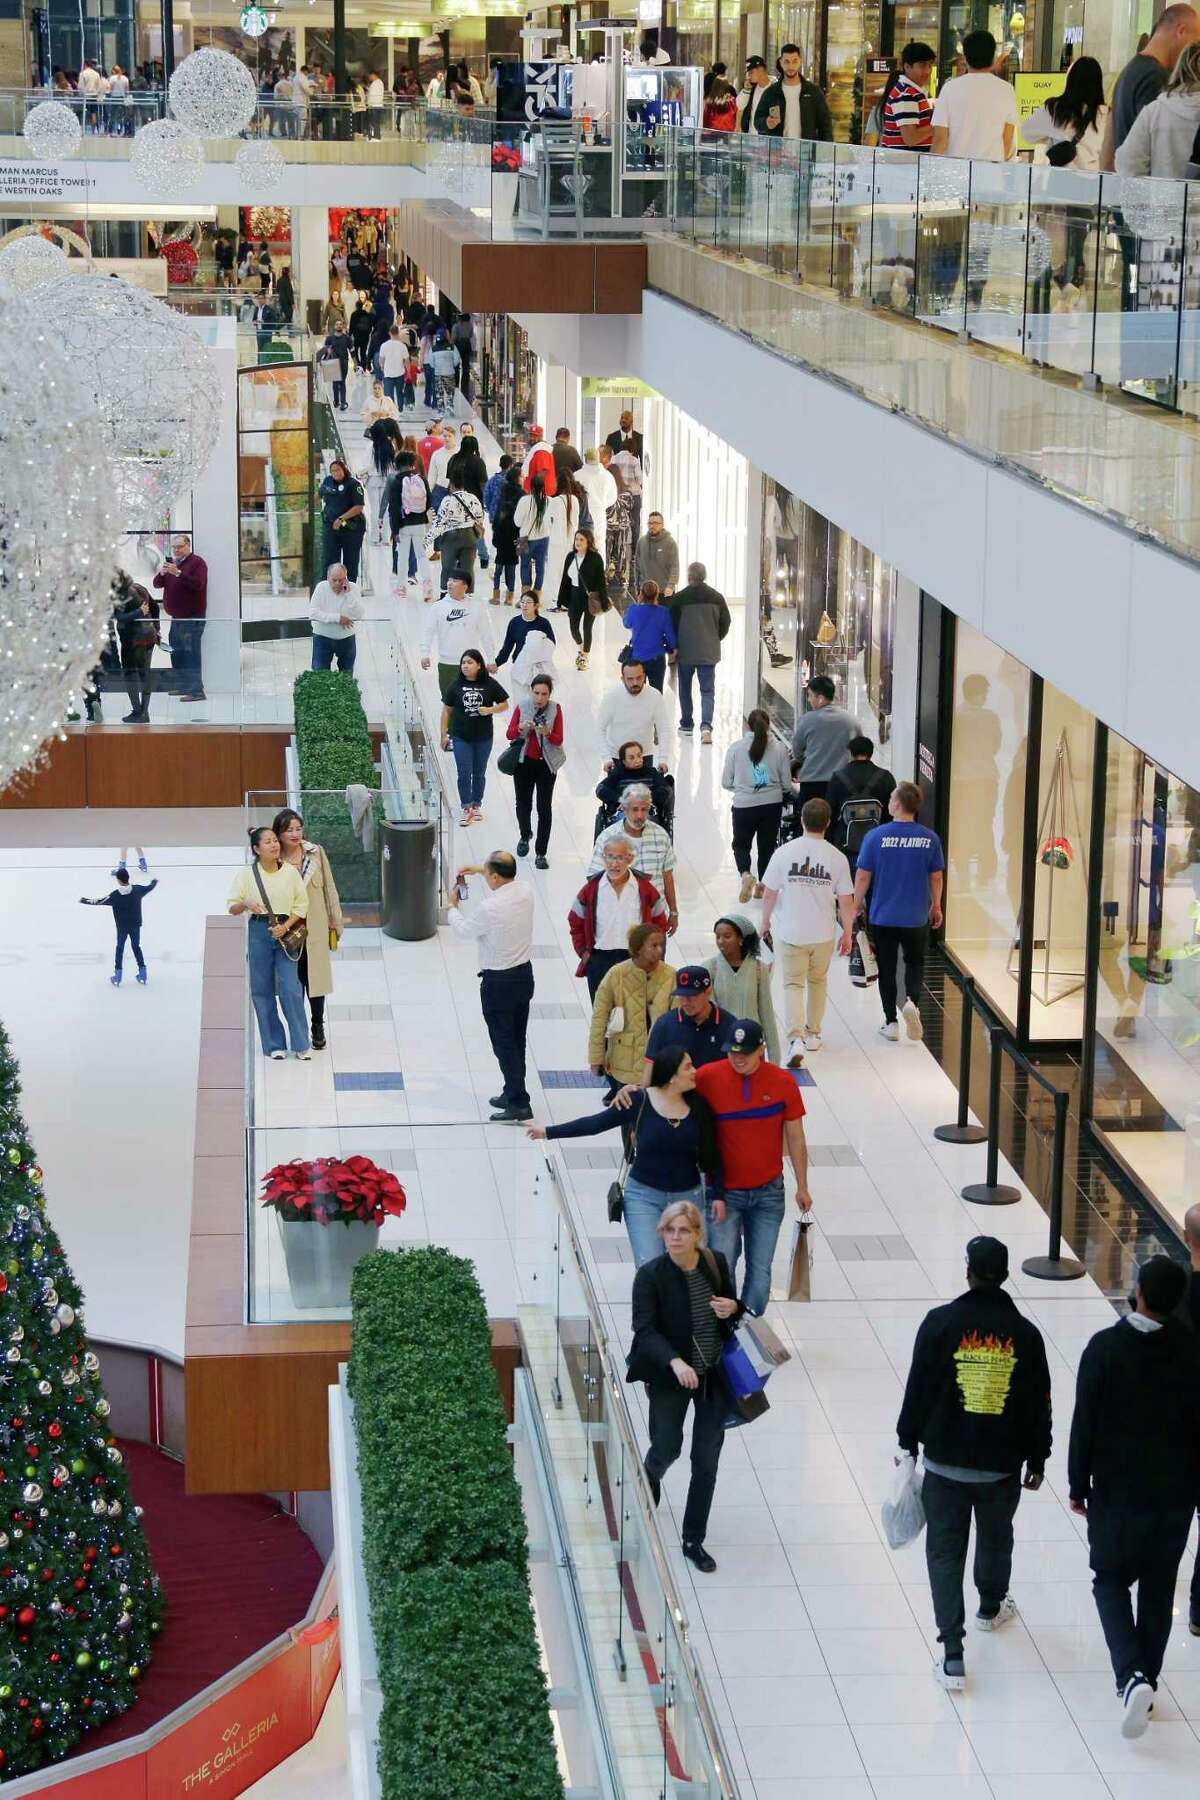 Shoppers in the Galleria Mall on Black Friday, the official start of the holiday shopping season, Friday, Nov. 25, 2022 in Houston, TX.